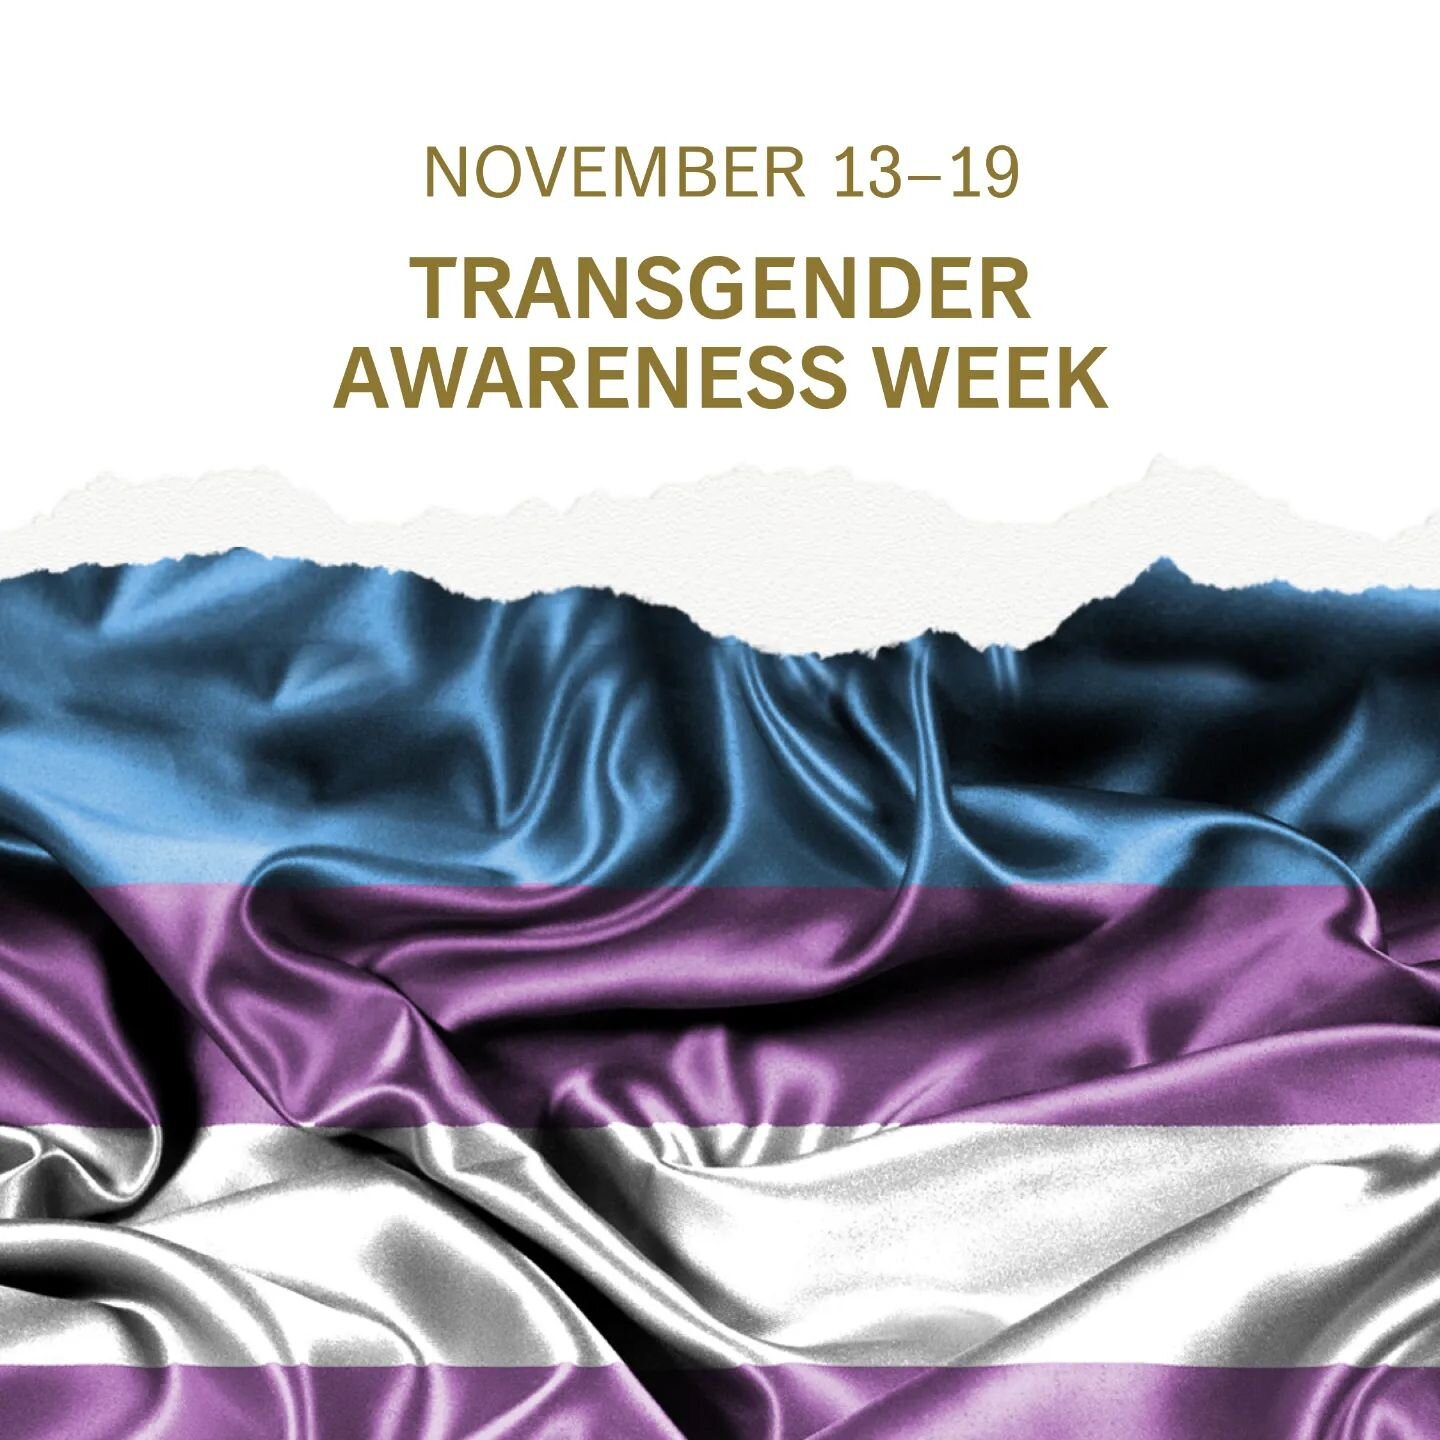 This week and every week, celebrate and uphold the rights of the trans people in our lives.

#transdayofremembrance #transawarenessweek2022 #genderminorities #transmentalhealth #tindrumtherapy #mentalhealth #genderbasedviolenceawareness #genderbasedt